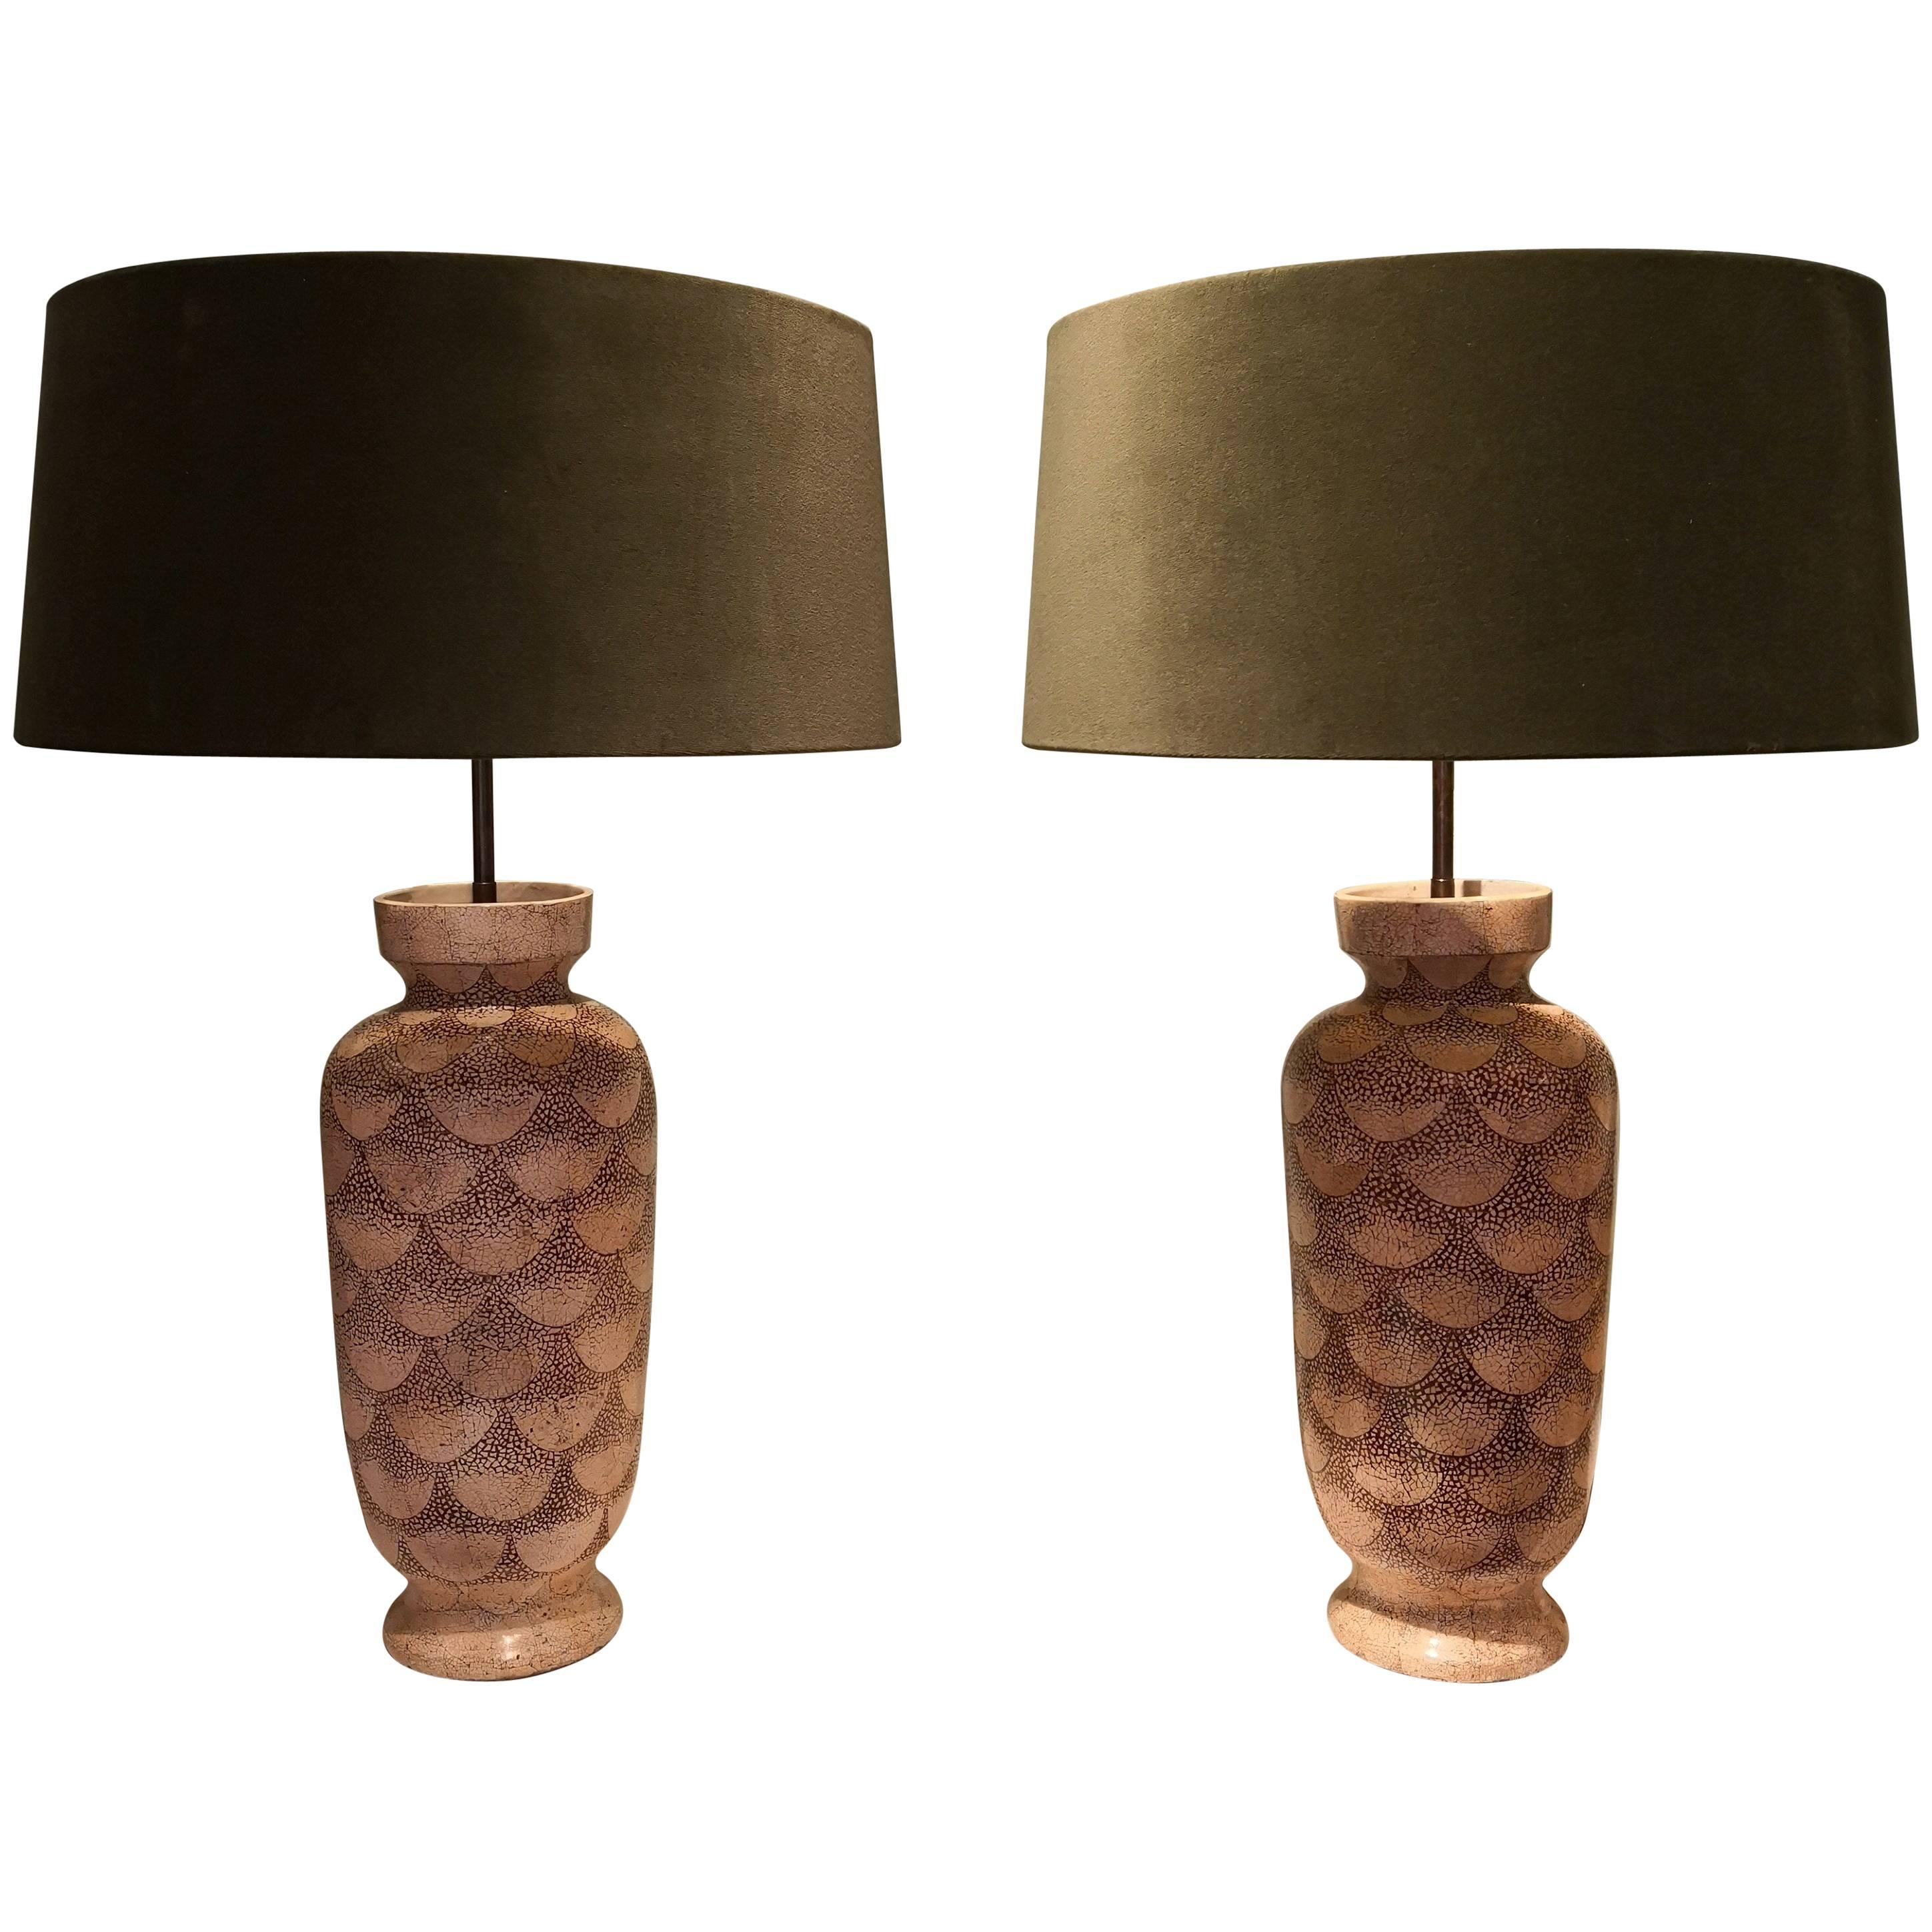 Pair of French Art Deco Table Lamps Ceramic